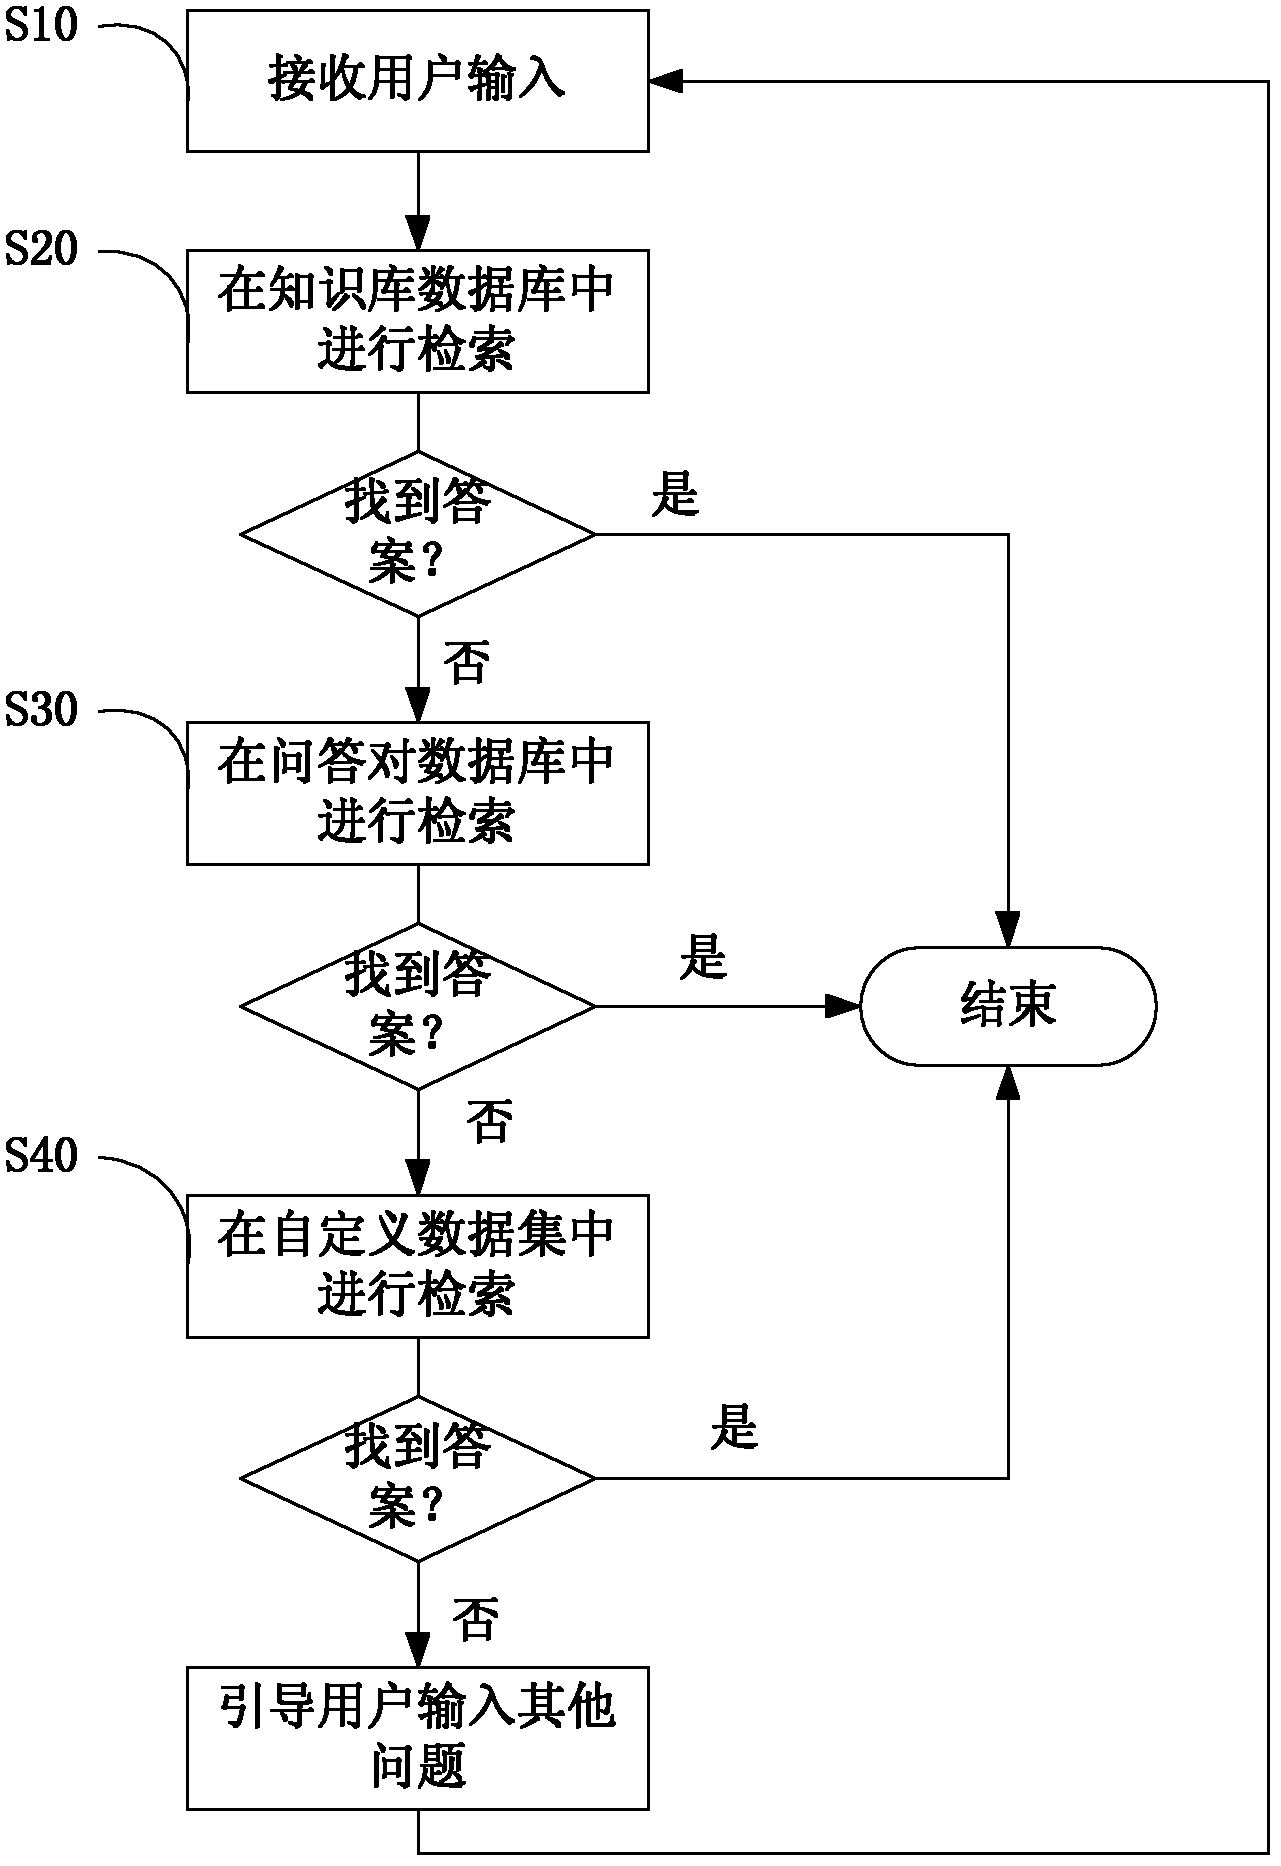 Medical field deep question and answer method and medical retrieval system